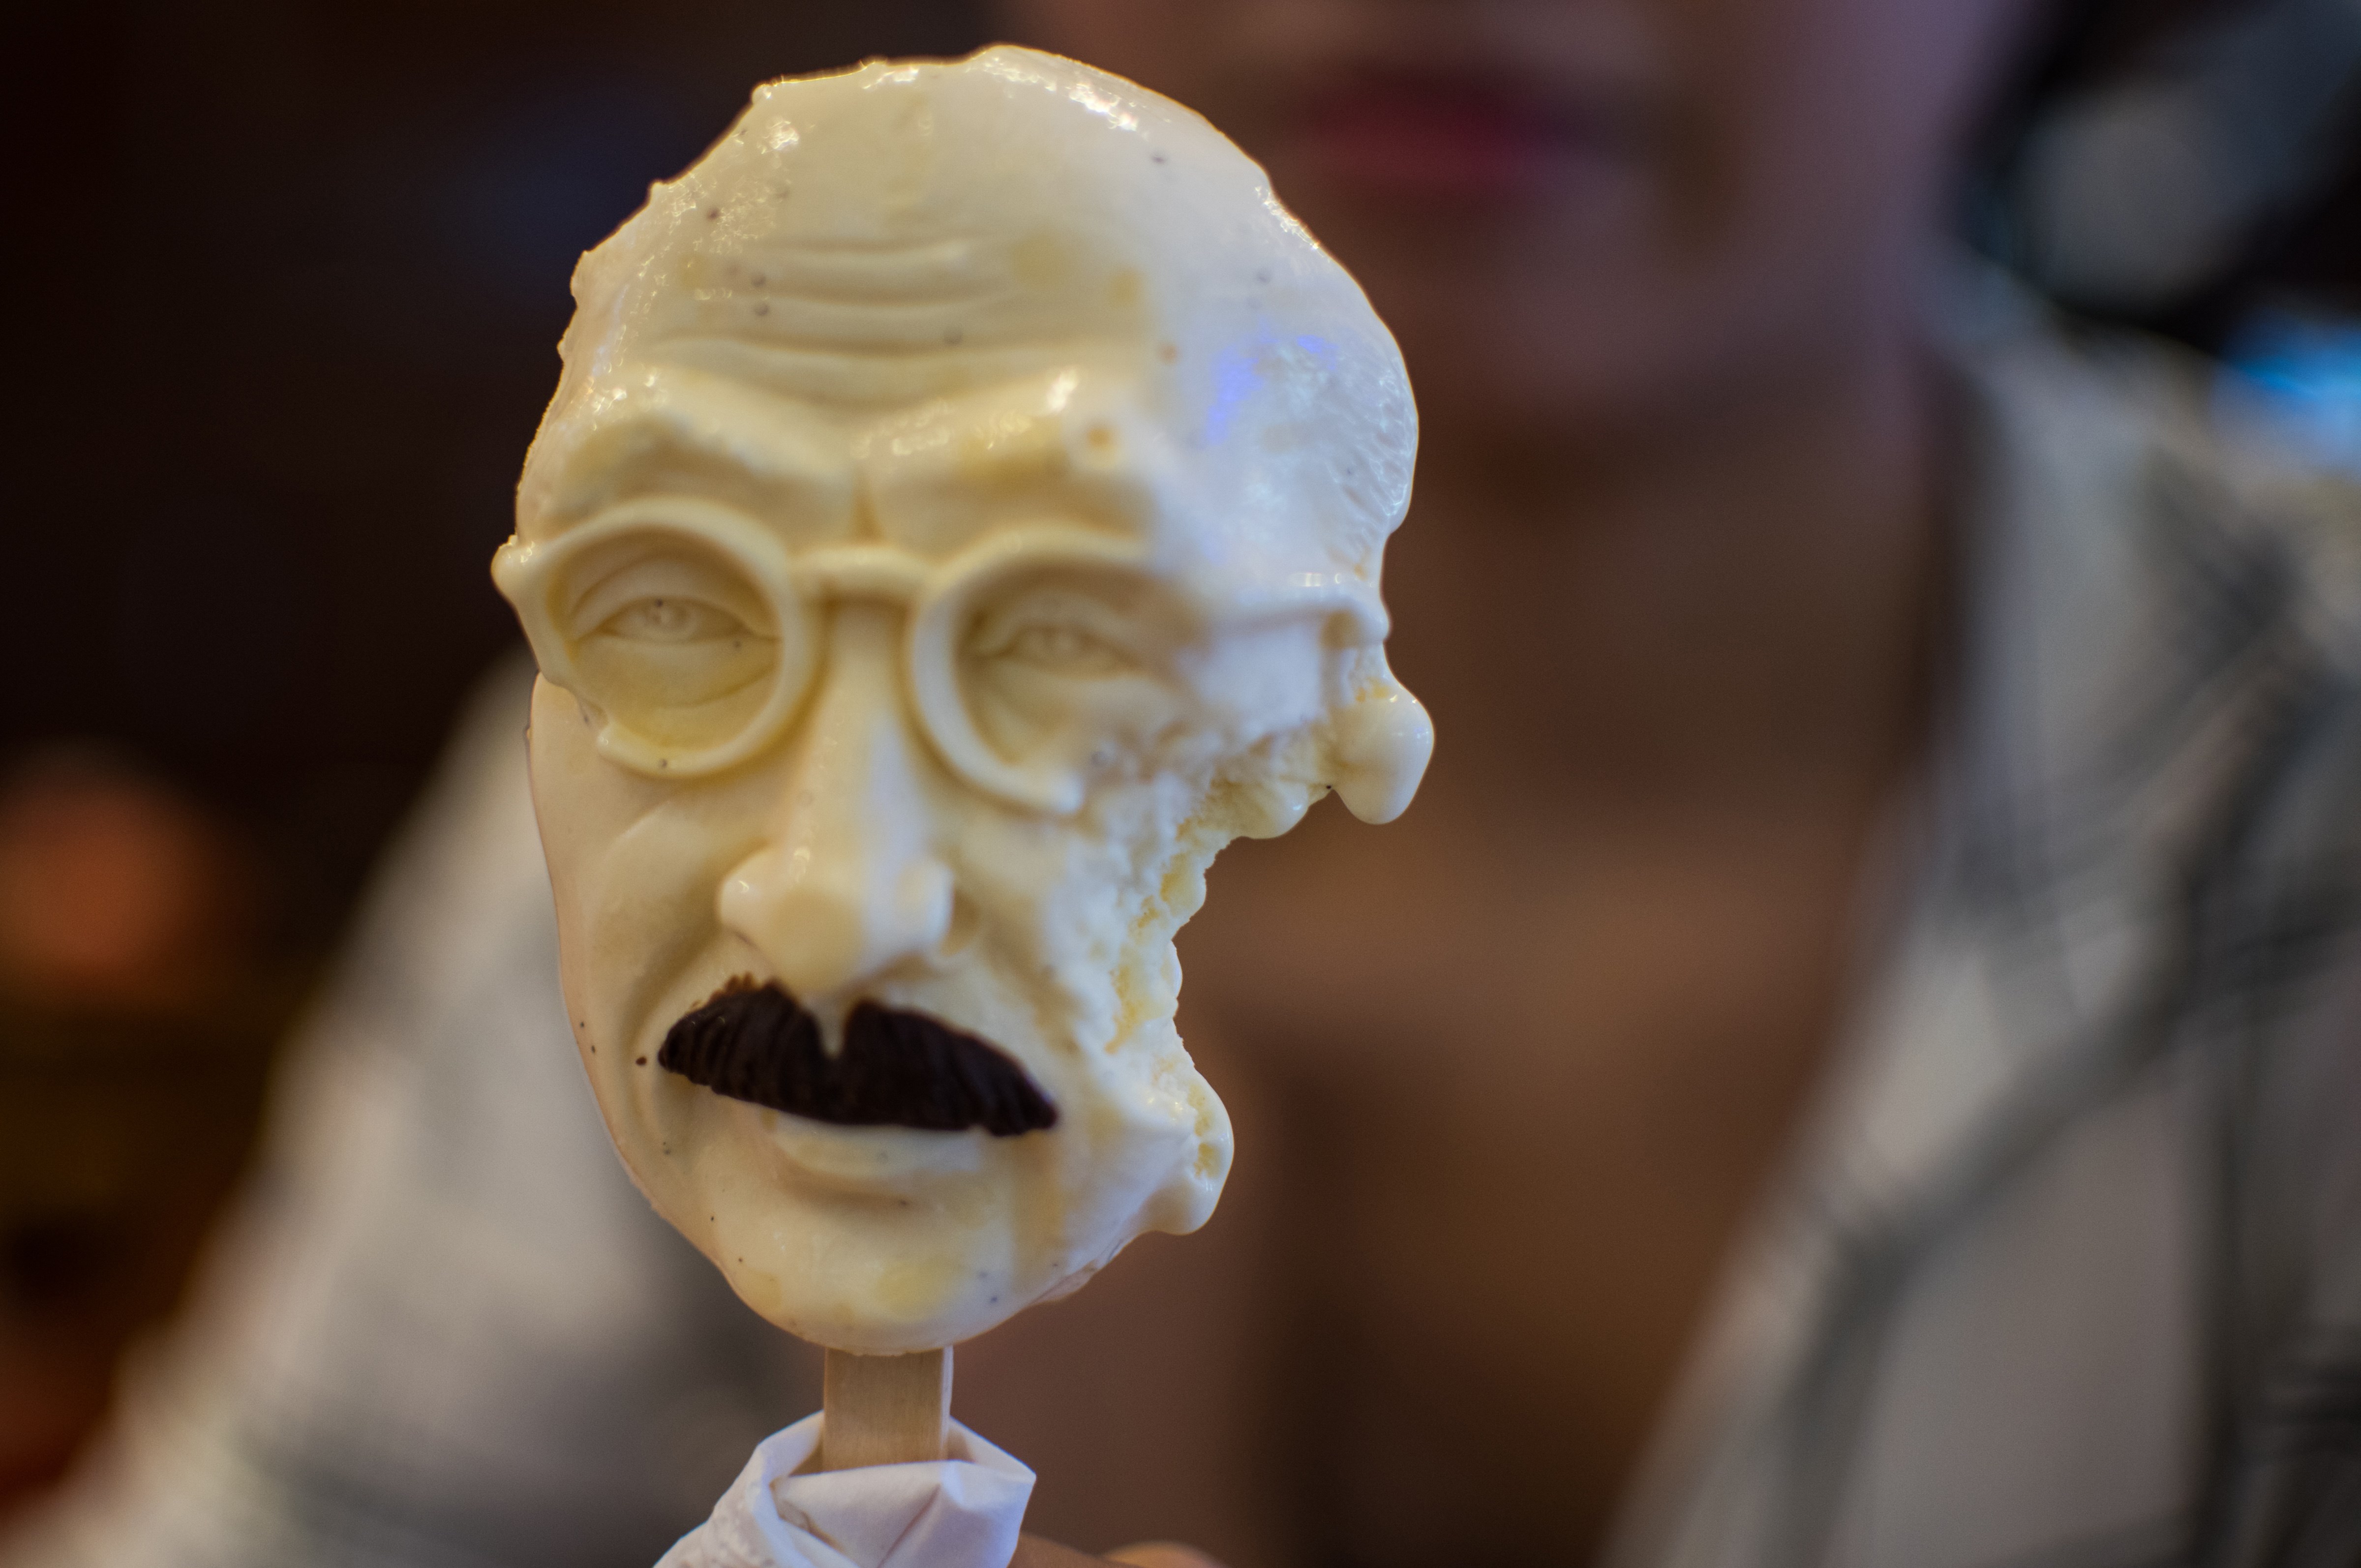 A woman sells an ice cream in the shape of executed Japanese war criminal Hideki Tojo at an ice cream store in Shanghai on Sept. 2, 2015 (Johannes Eisele—AFP/Getty Images)